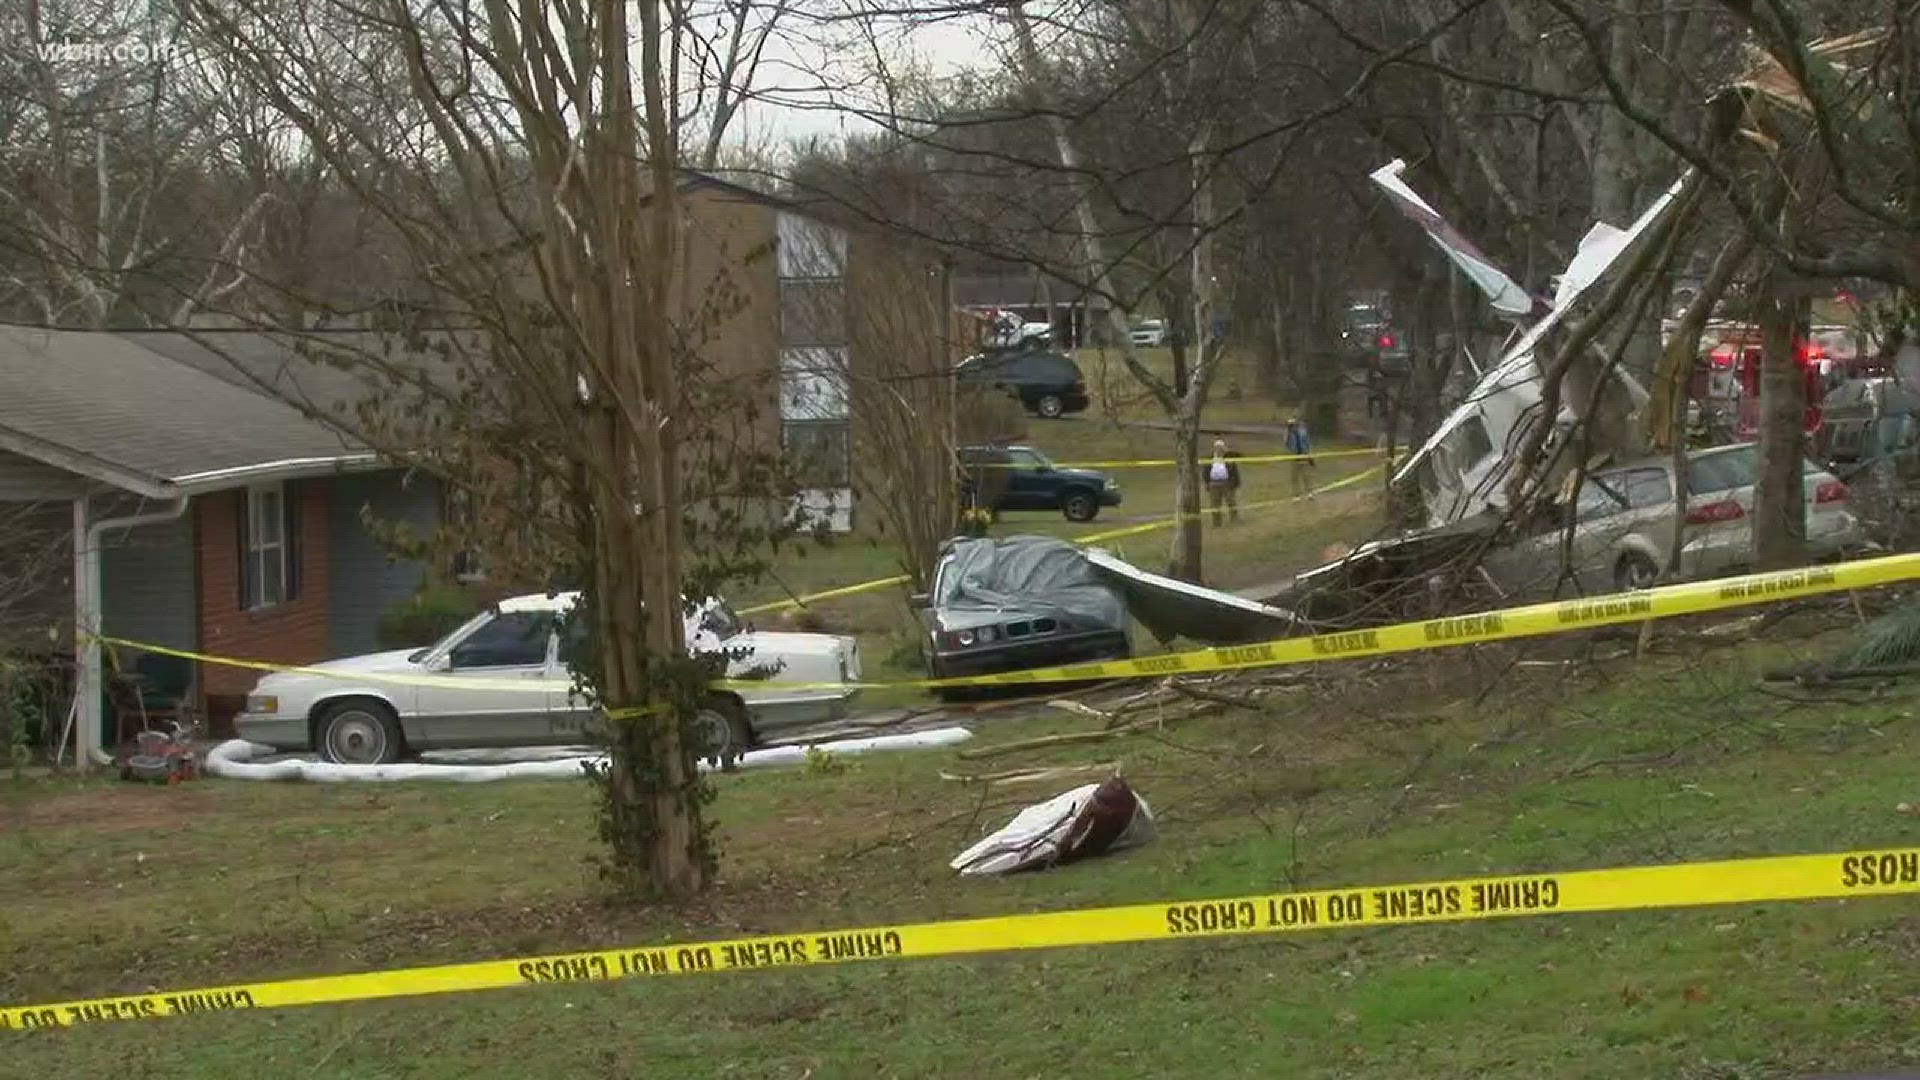 Dec. 19, 2017: Neighbors are being hailed as heroes after rushing into the wreckage of a plane crash in East Knoxville.